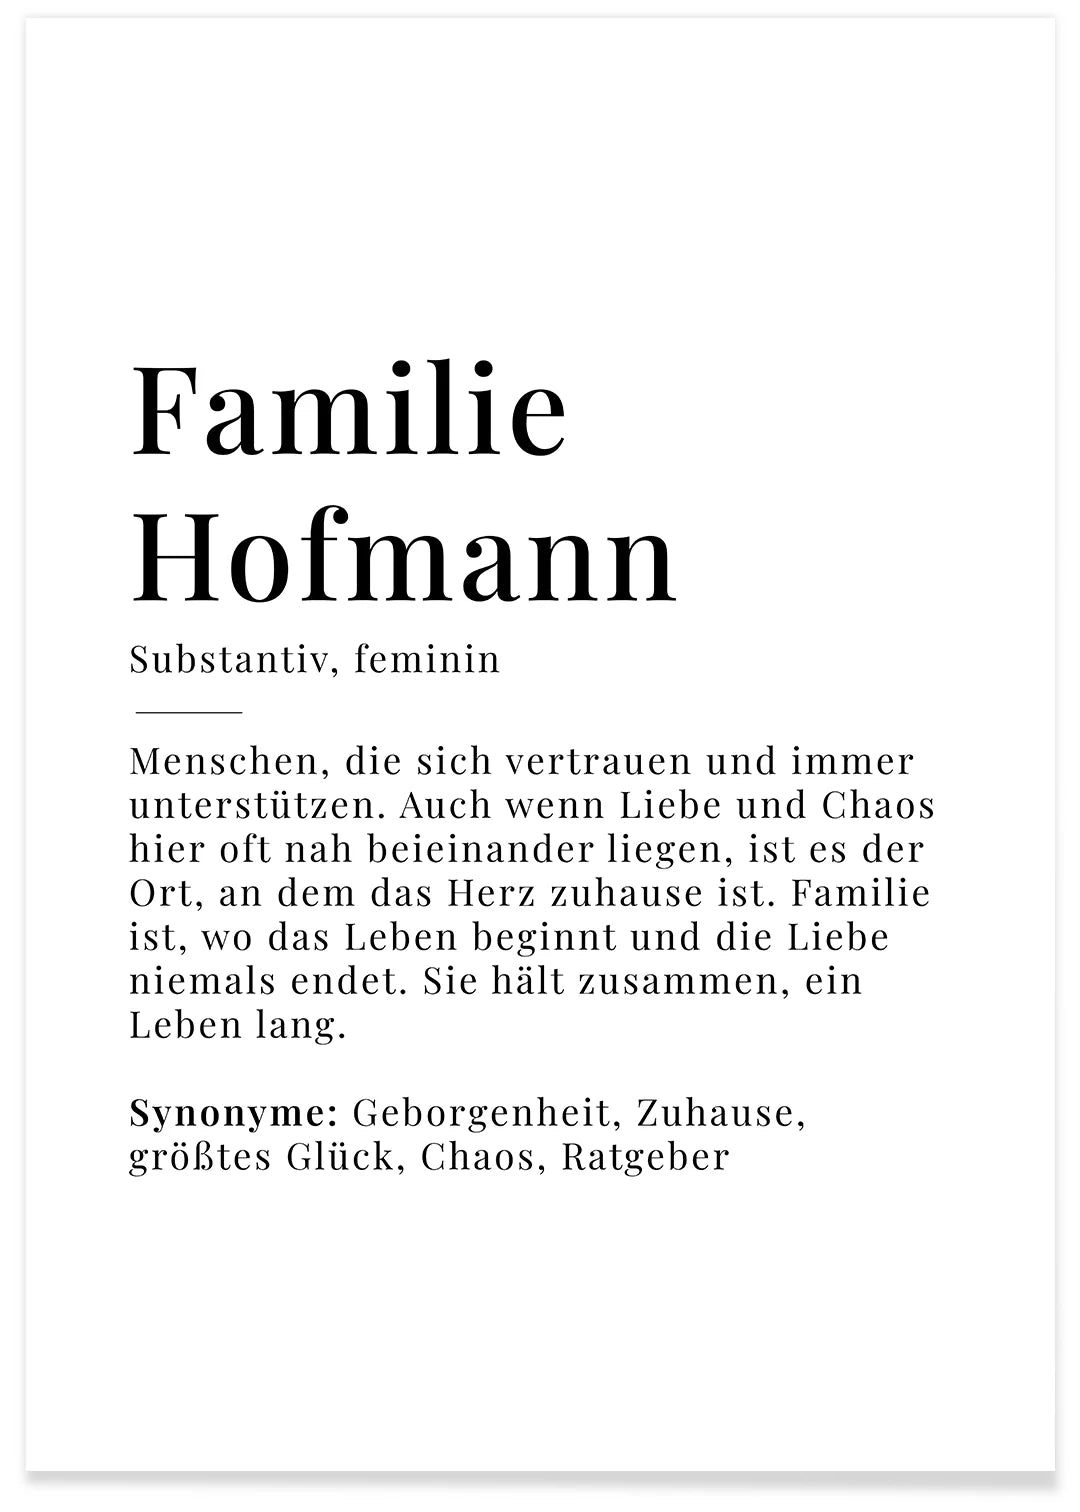 Poster"Family Definition"